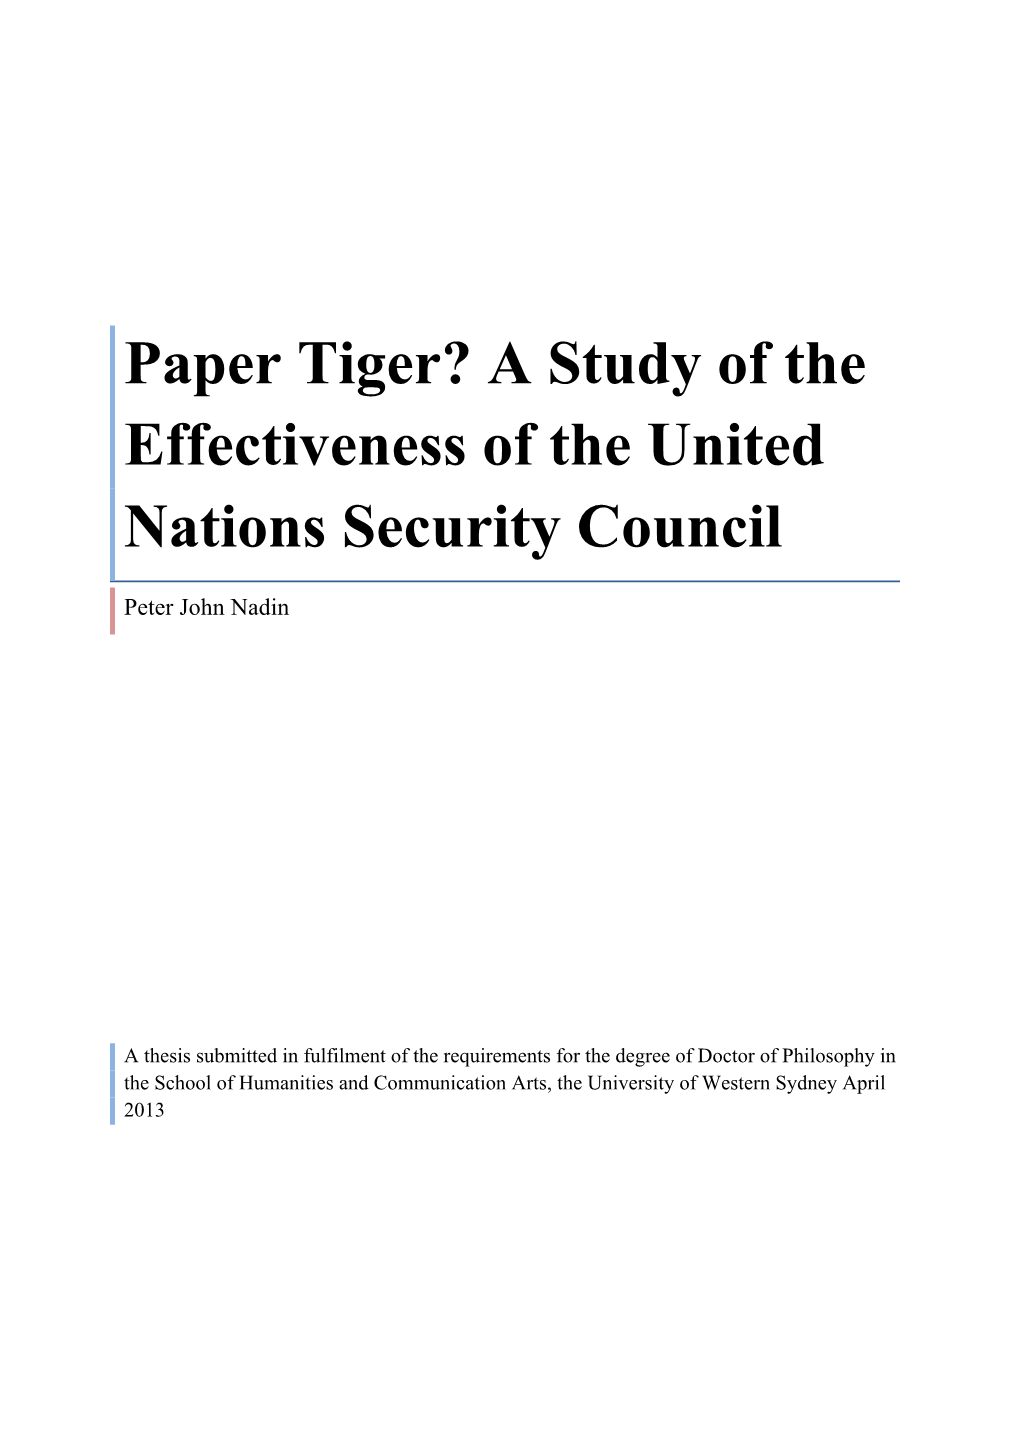 Paper Tiger? a Study of the Effectiveness of the United Nations Security Council